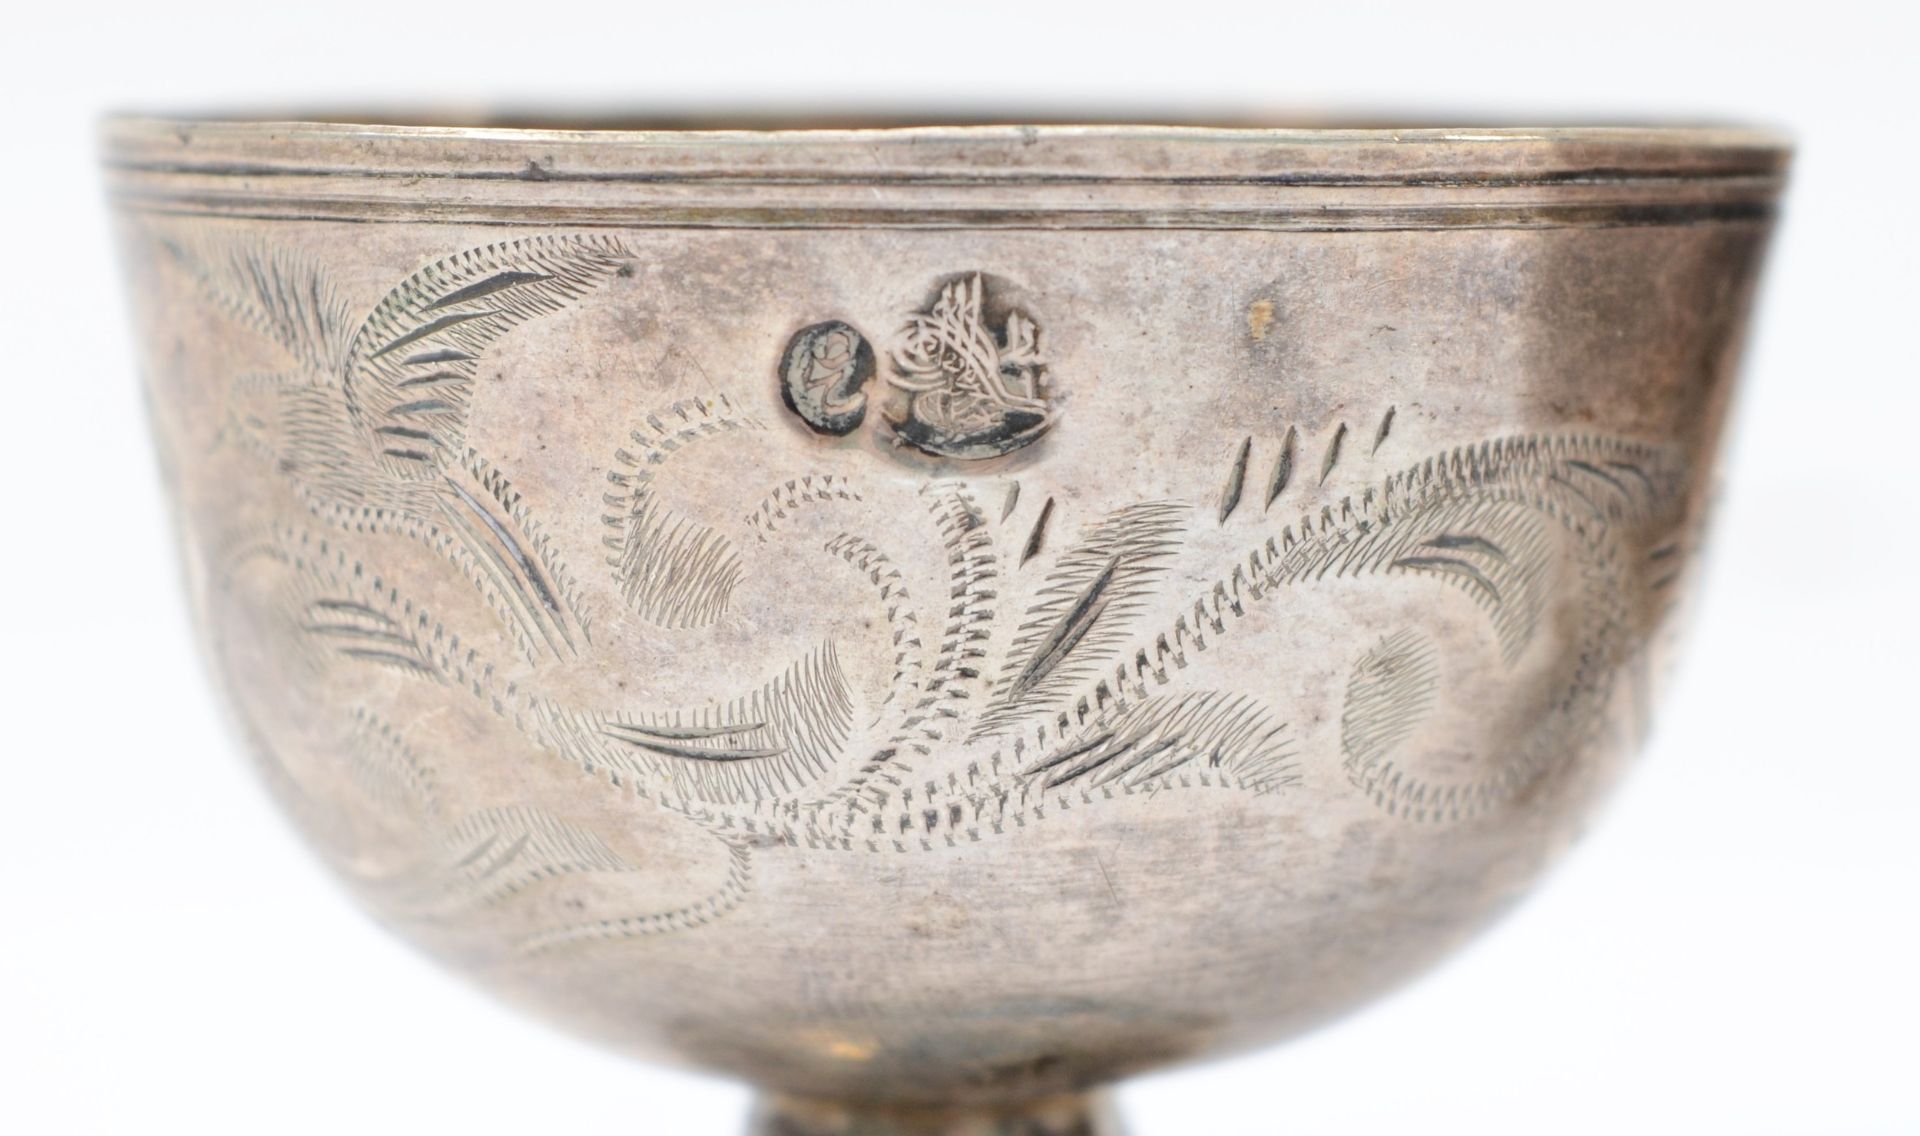 Two Ottoman Empire silver cups with chased scrolling decoration, 4.5 x 5.5cm, 52gm. - Image 2 of 4